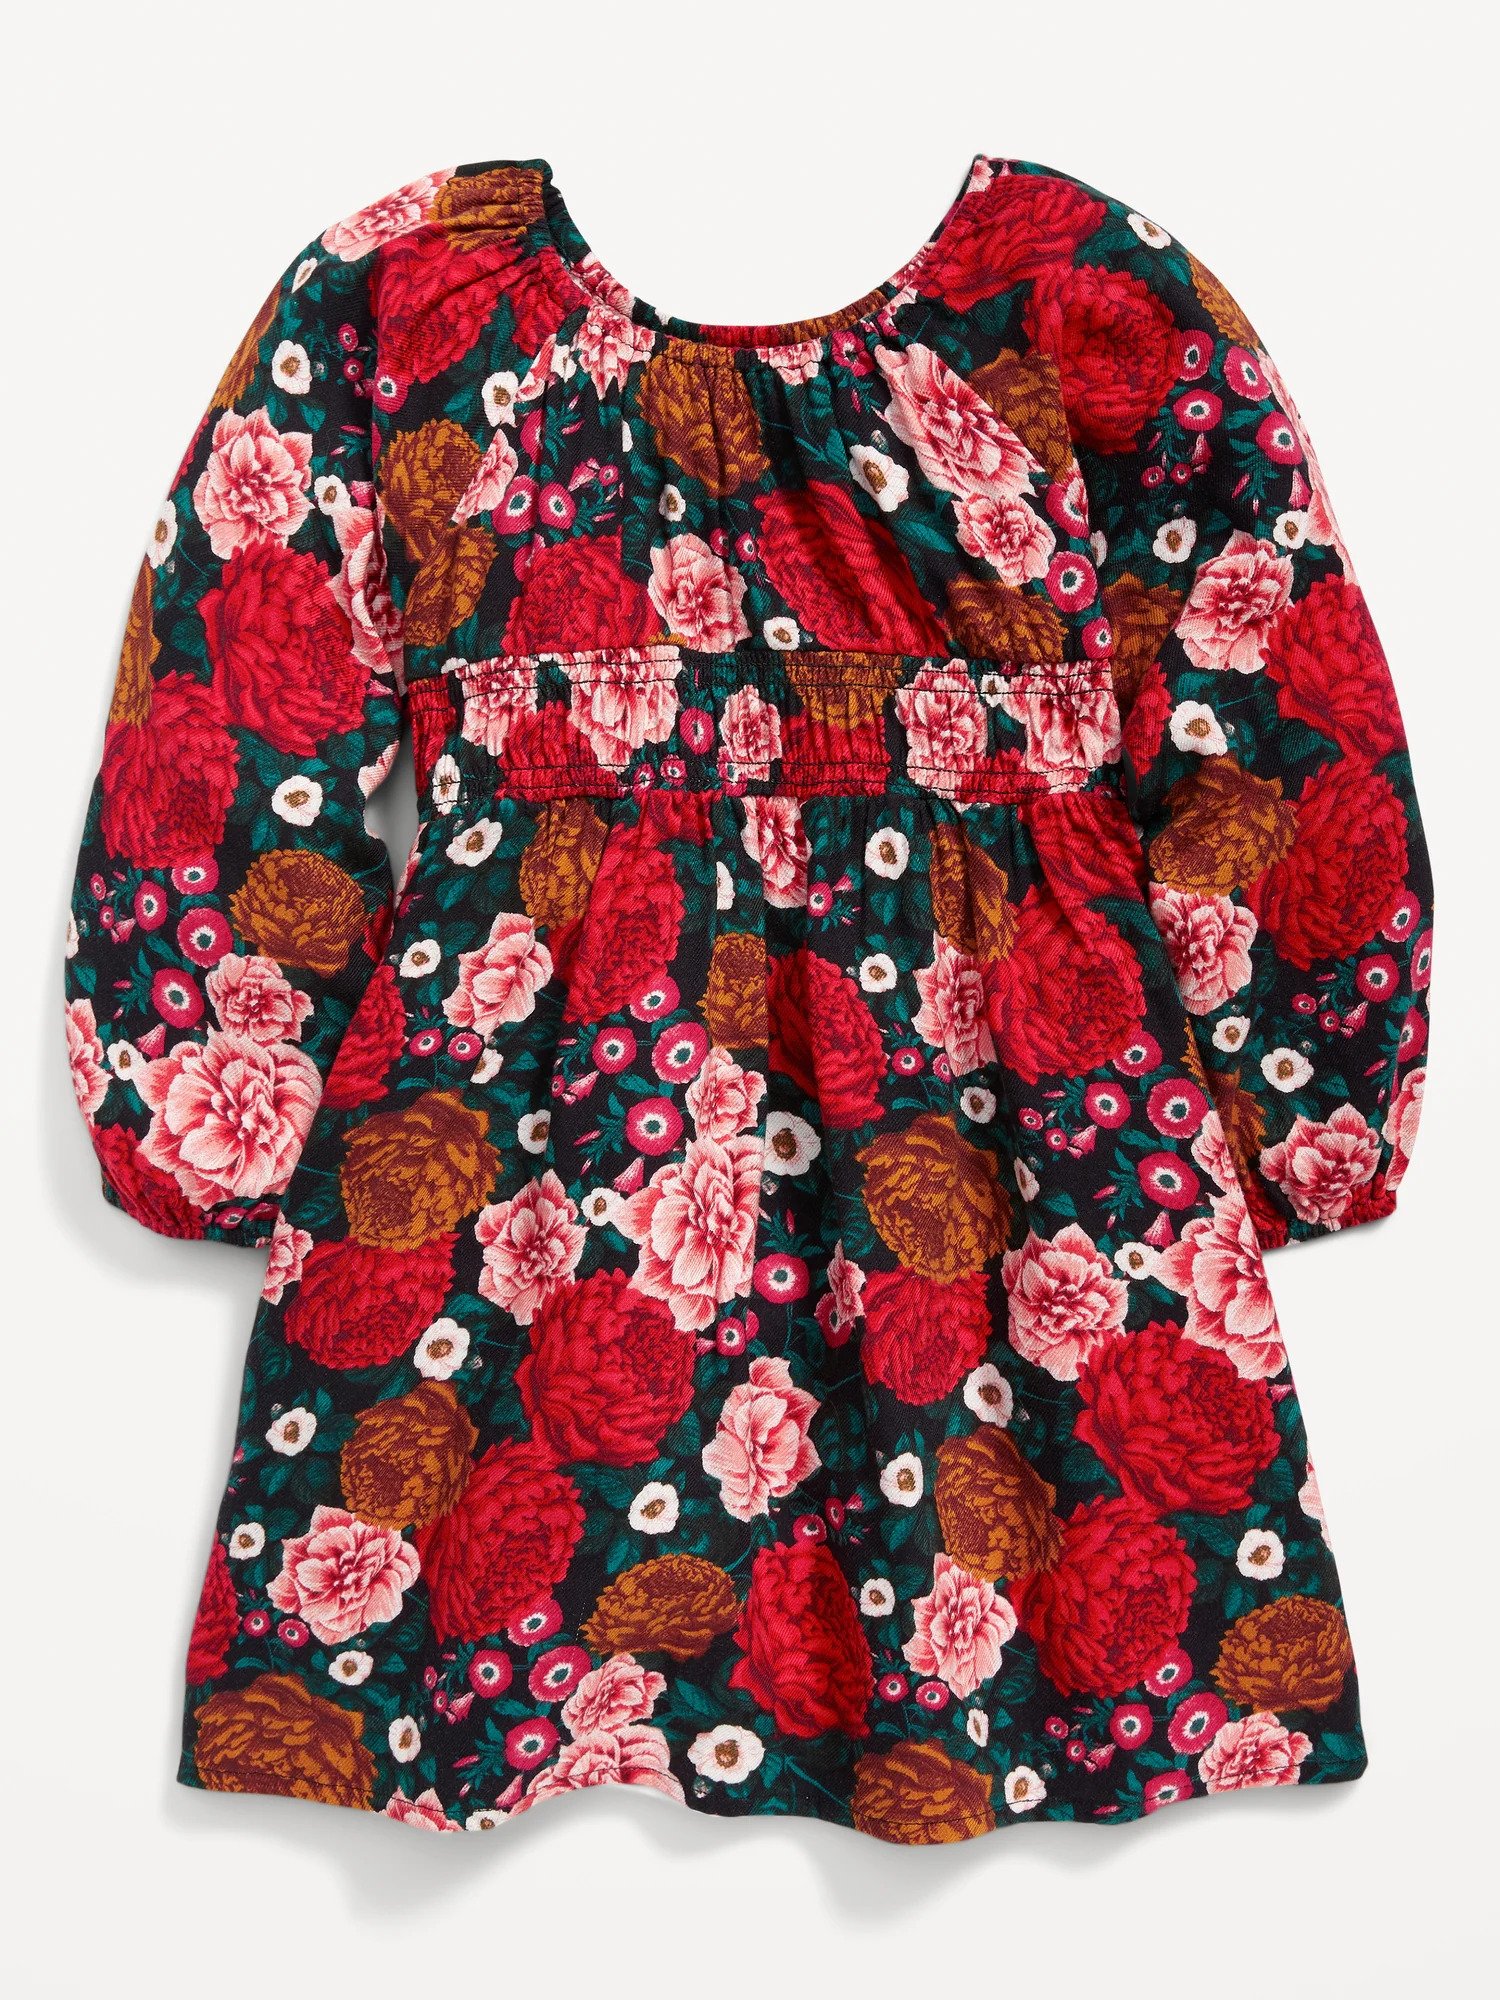    Long-Sleeve Twill Floral-Print Dress for Toddler Girls, P1,650   